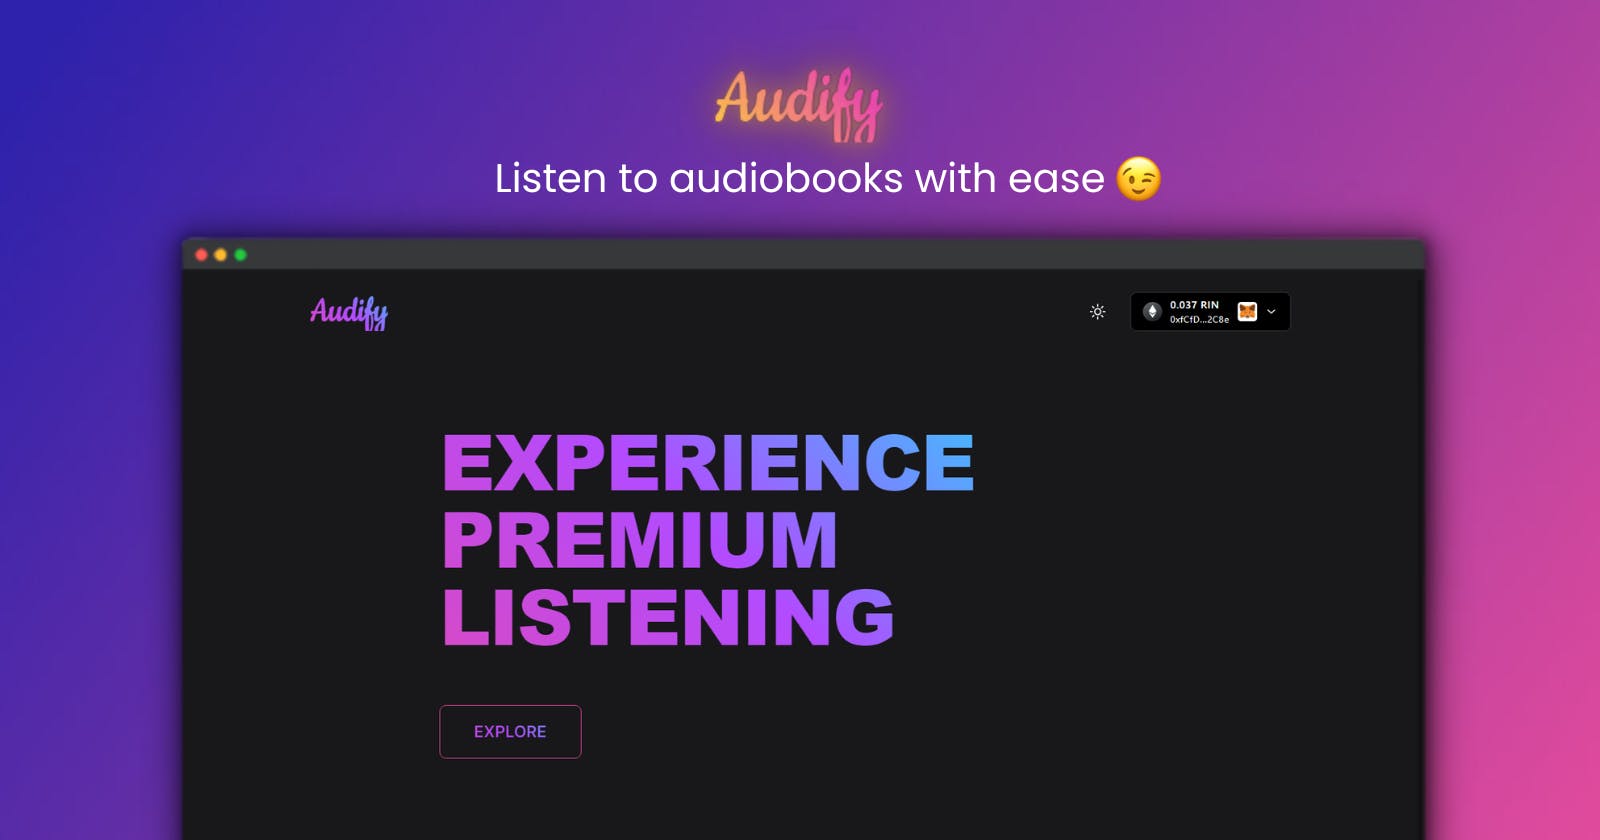 Introducing Audify - Listen to audiobooks with ease